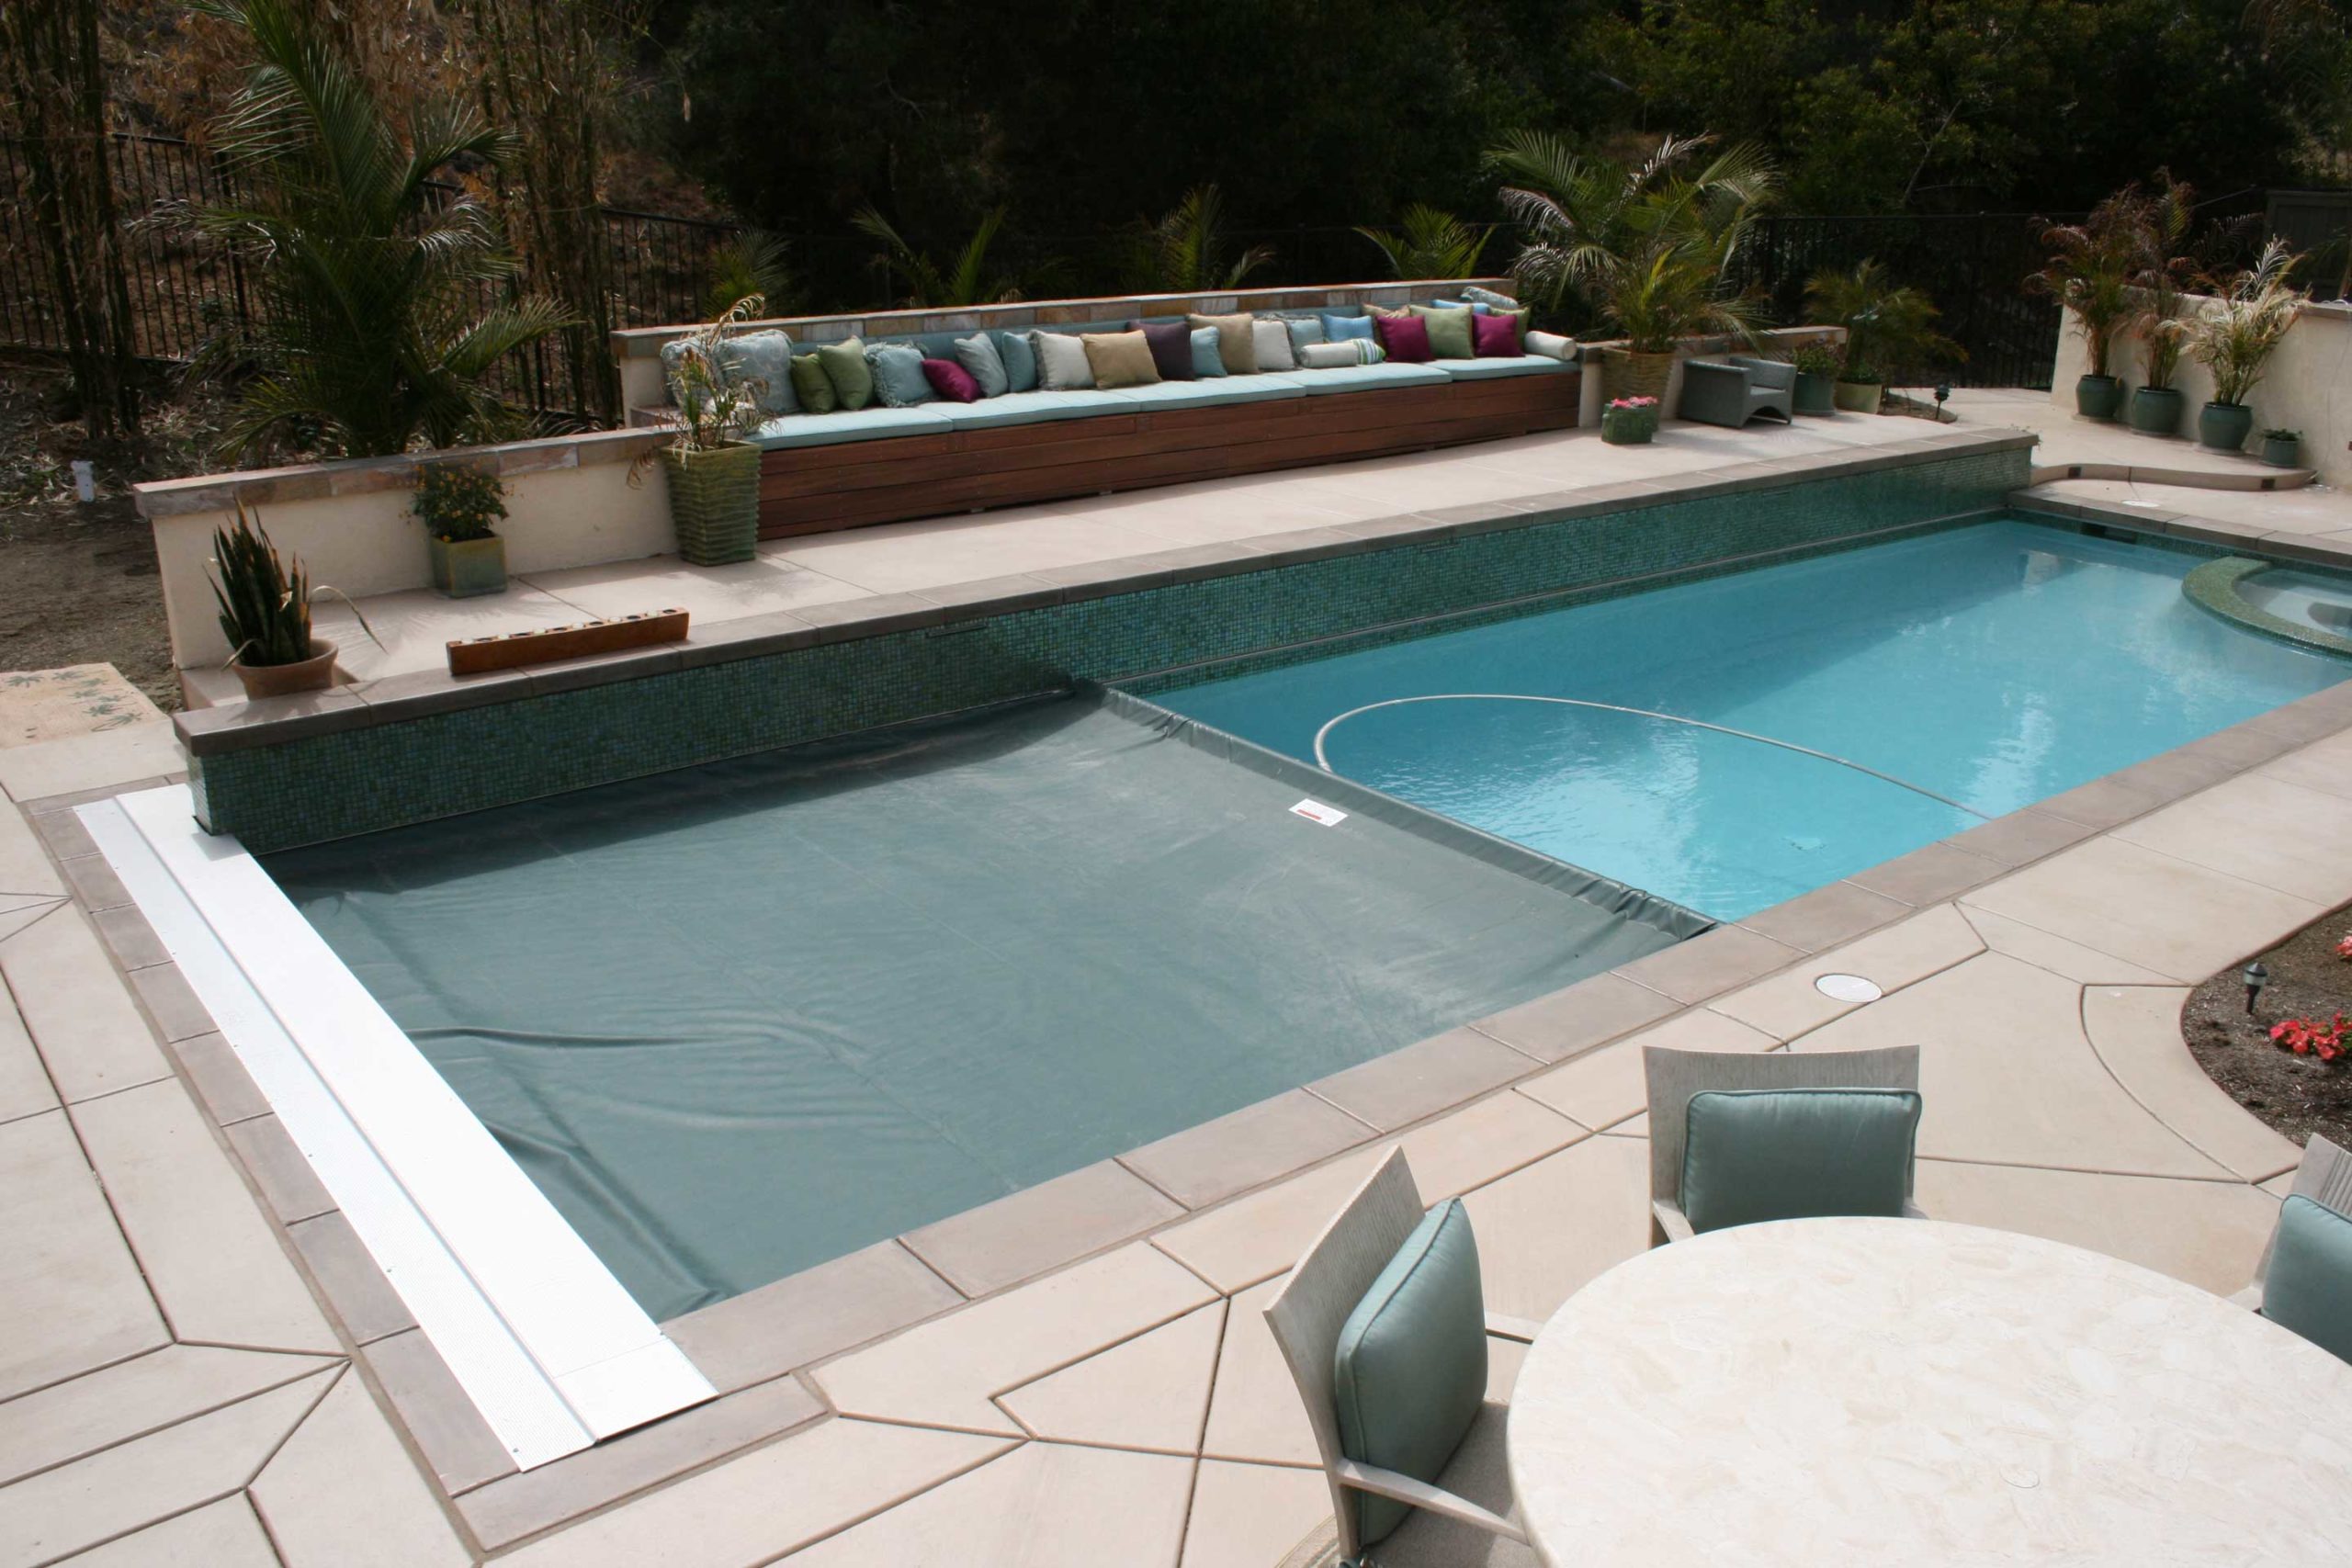 Automated Pool Cover Solutions